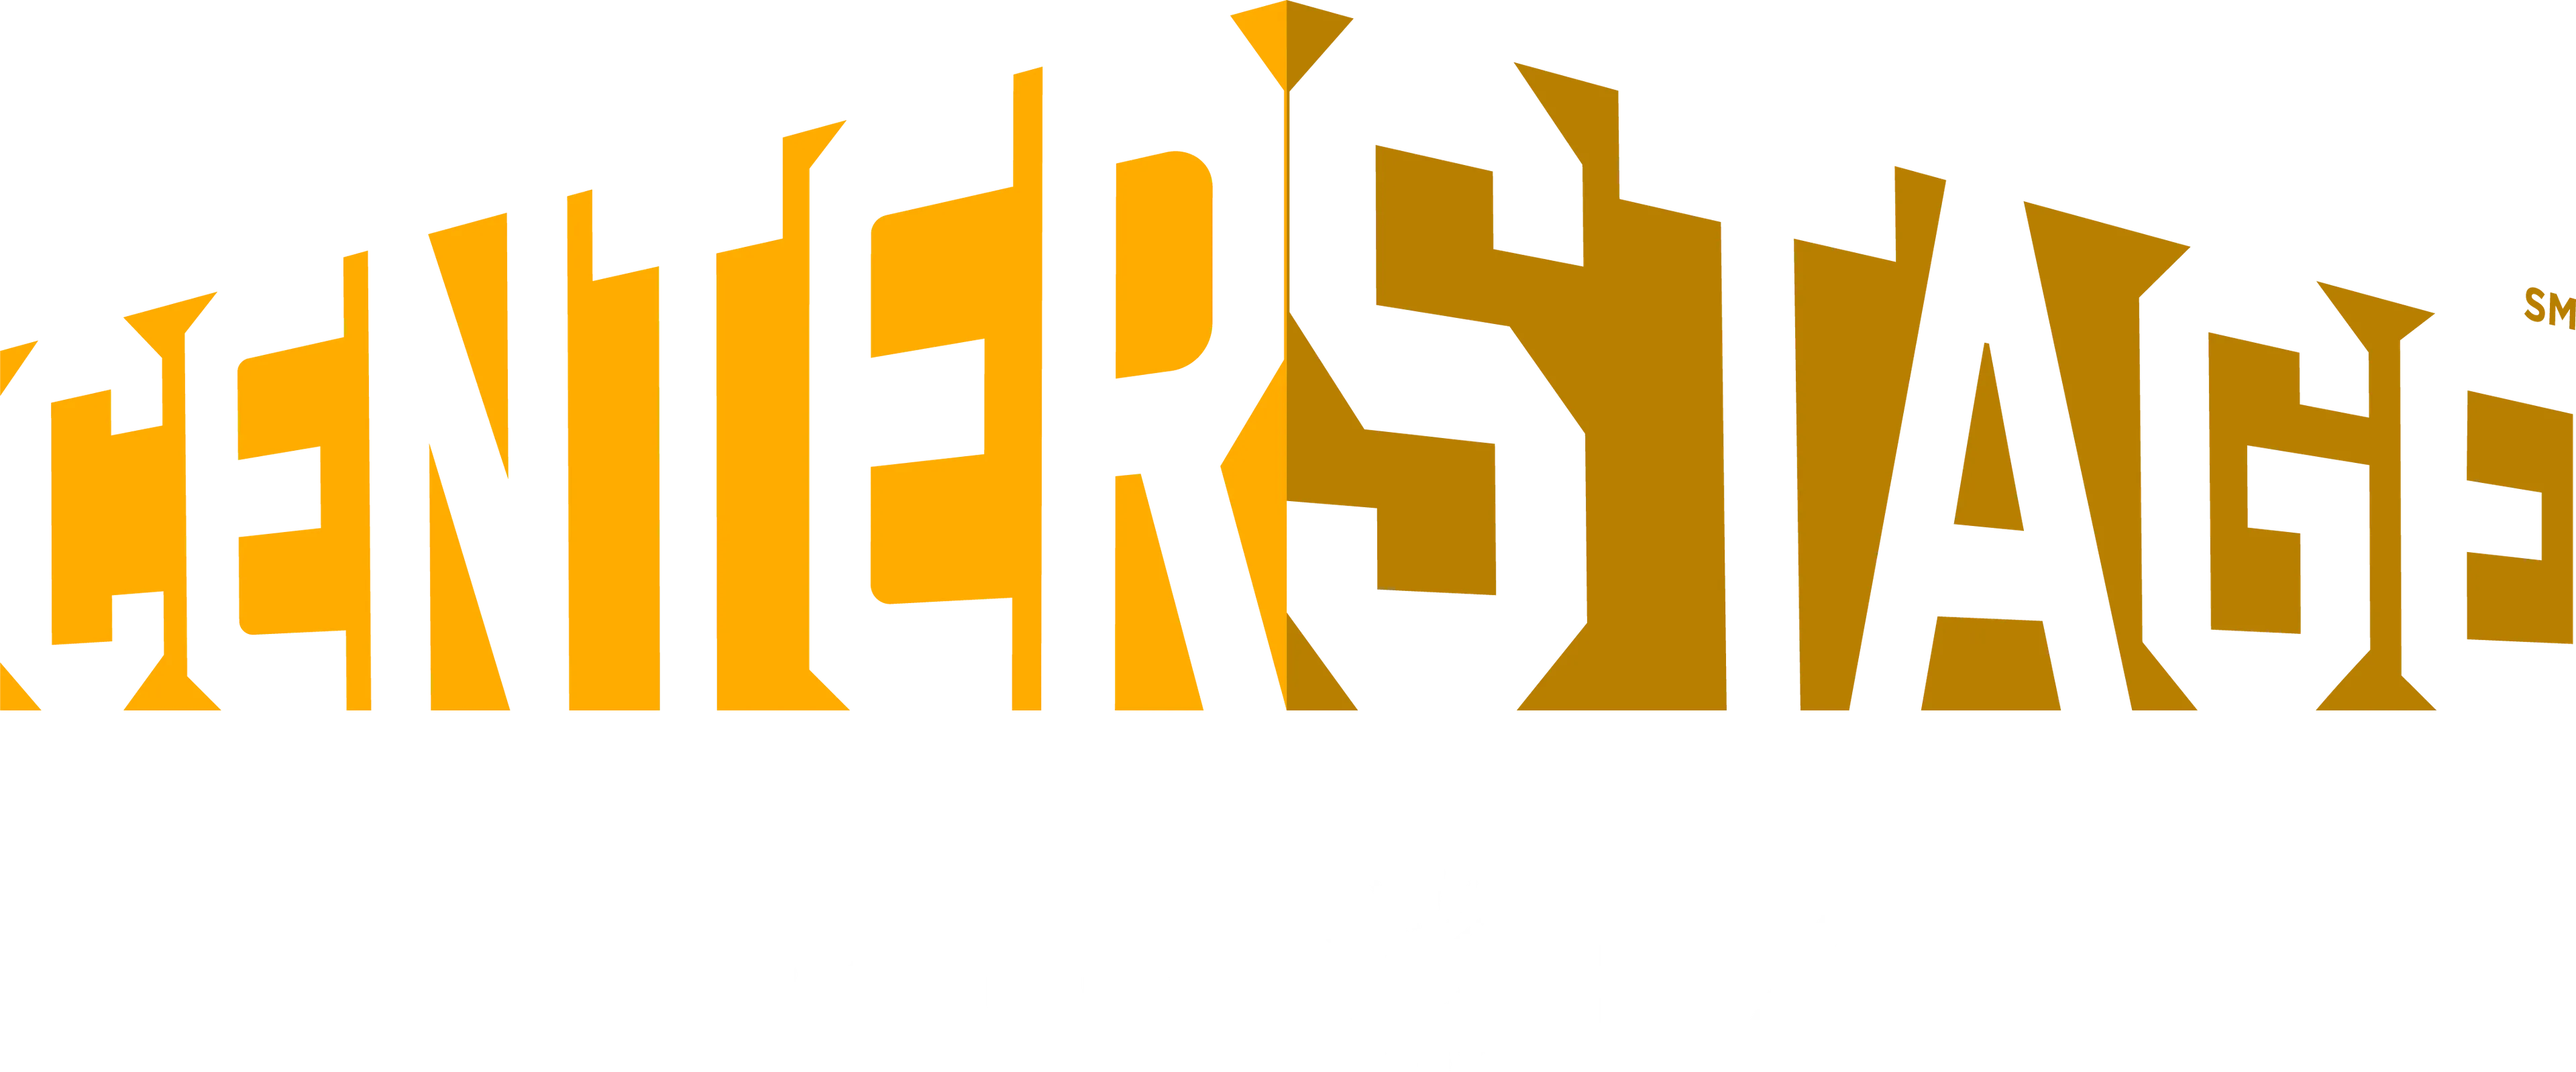 CENTERSTAGE, presented by RTX